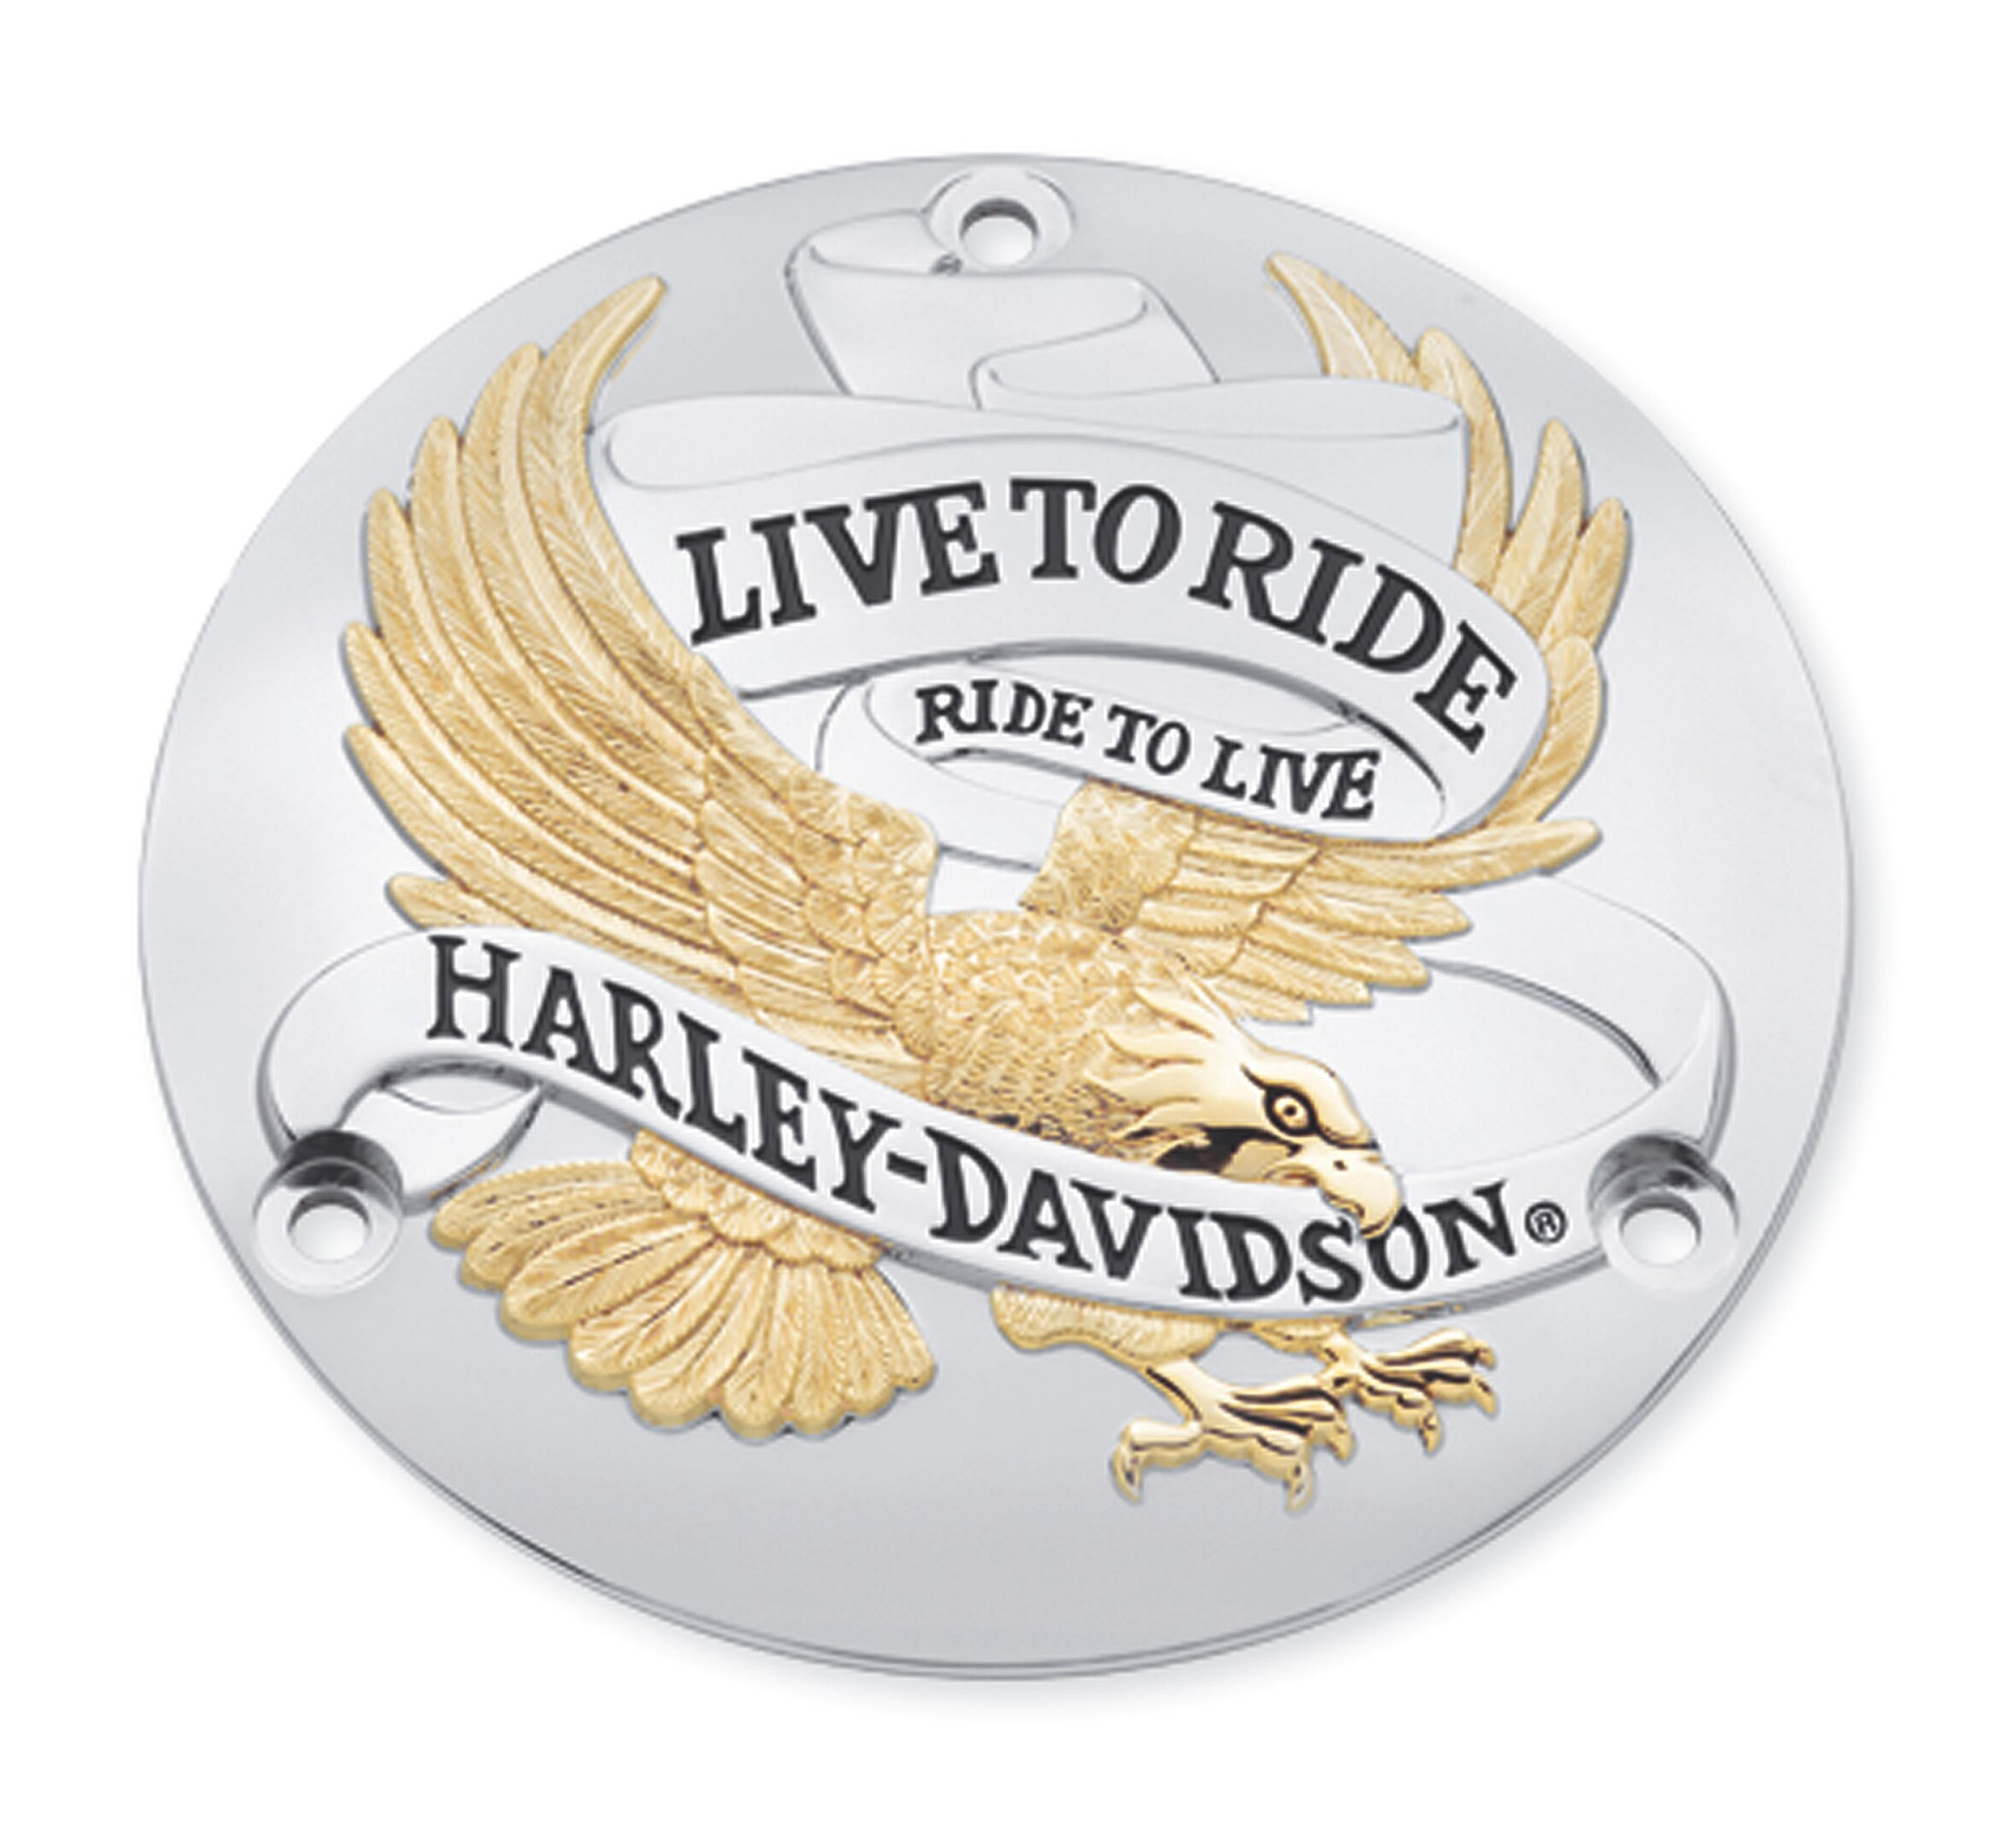 LIVE TO RIDE CHROME DERBY COVER FITS 1970-1998 HARLEY DAVIDSON BIG TWIN